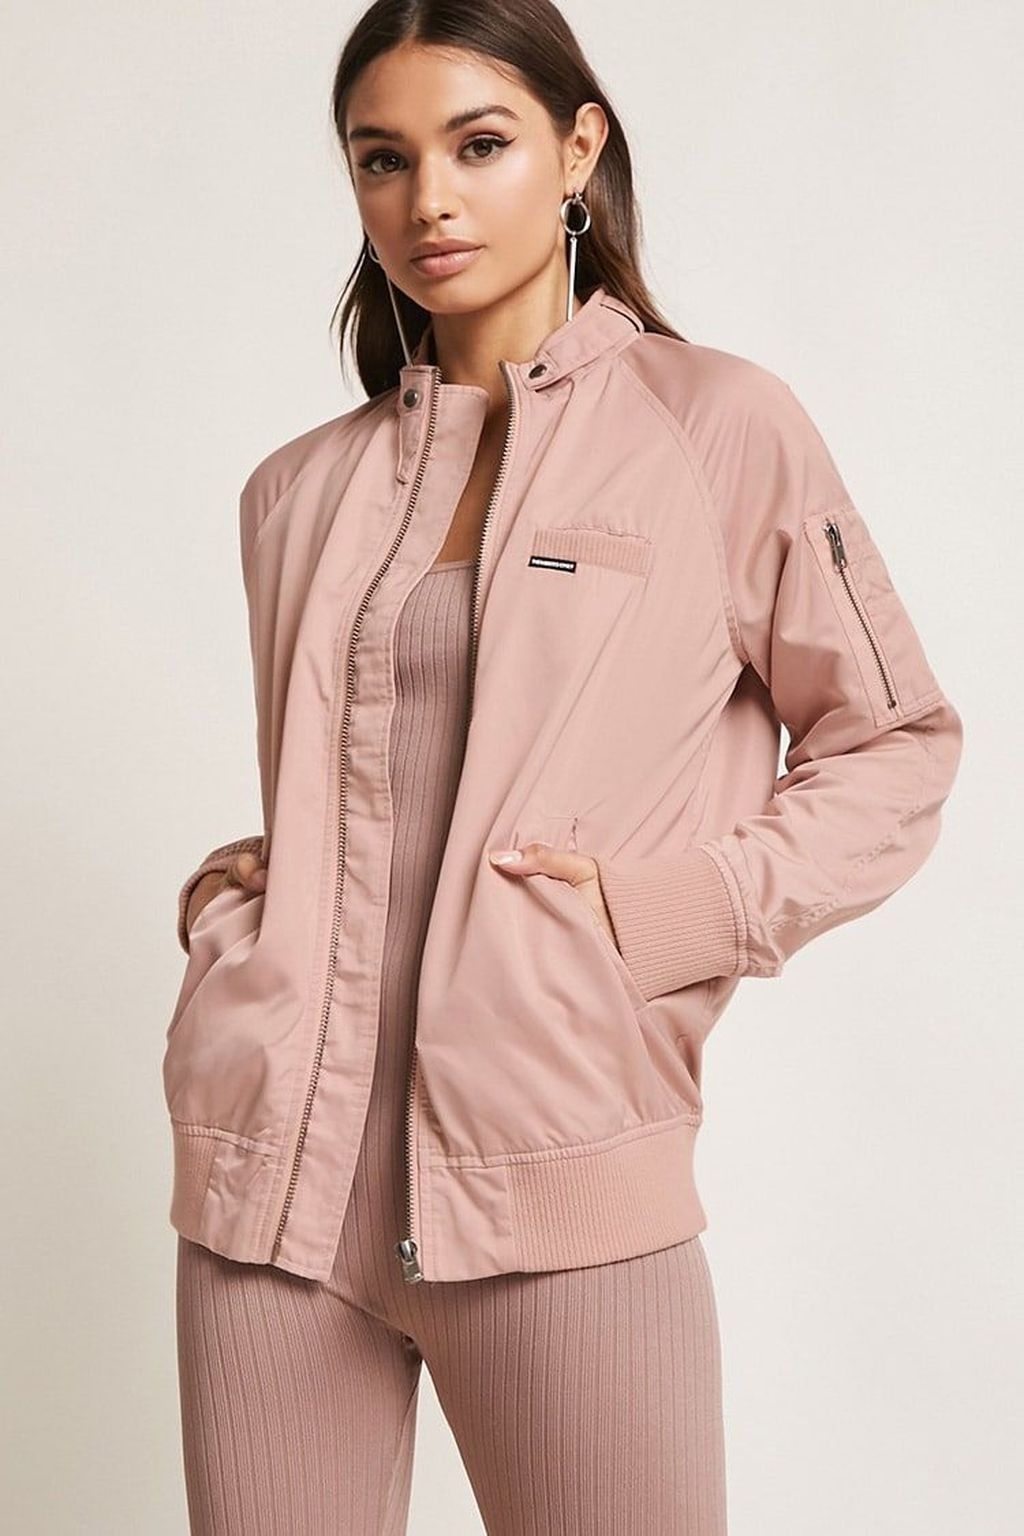 Charming Womens Lightweight Jackets Ideas For Spring31 